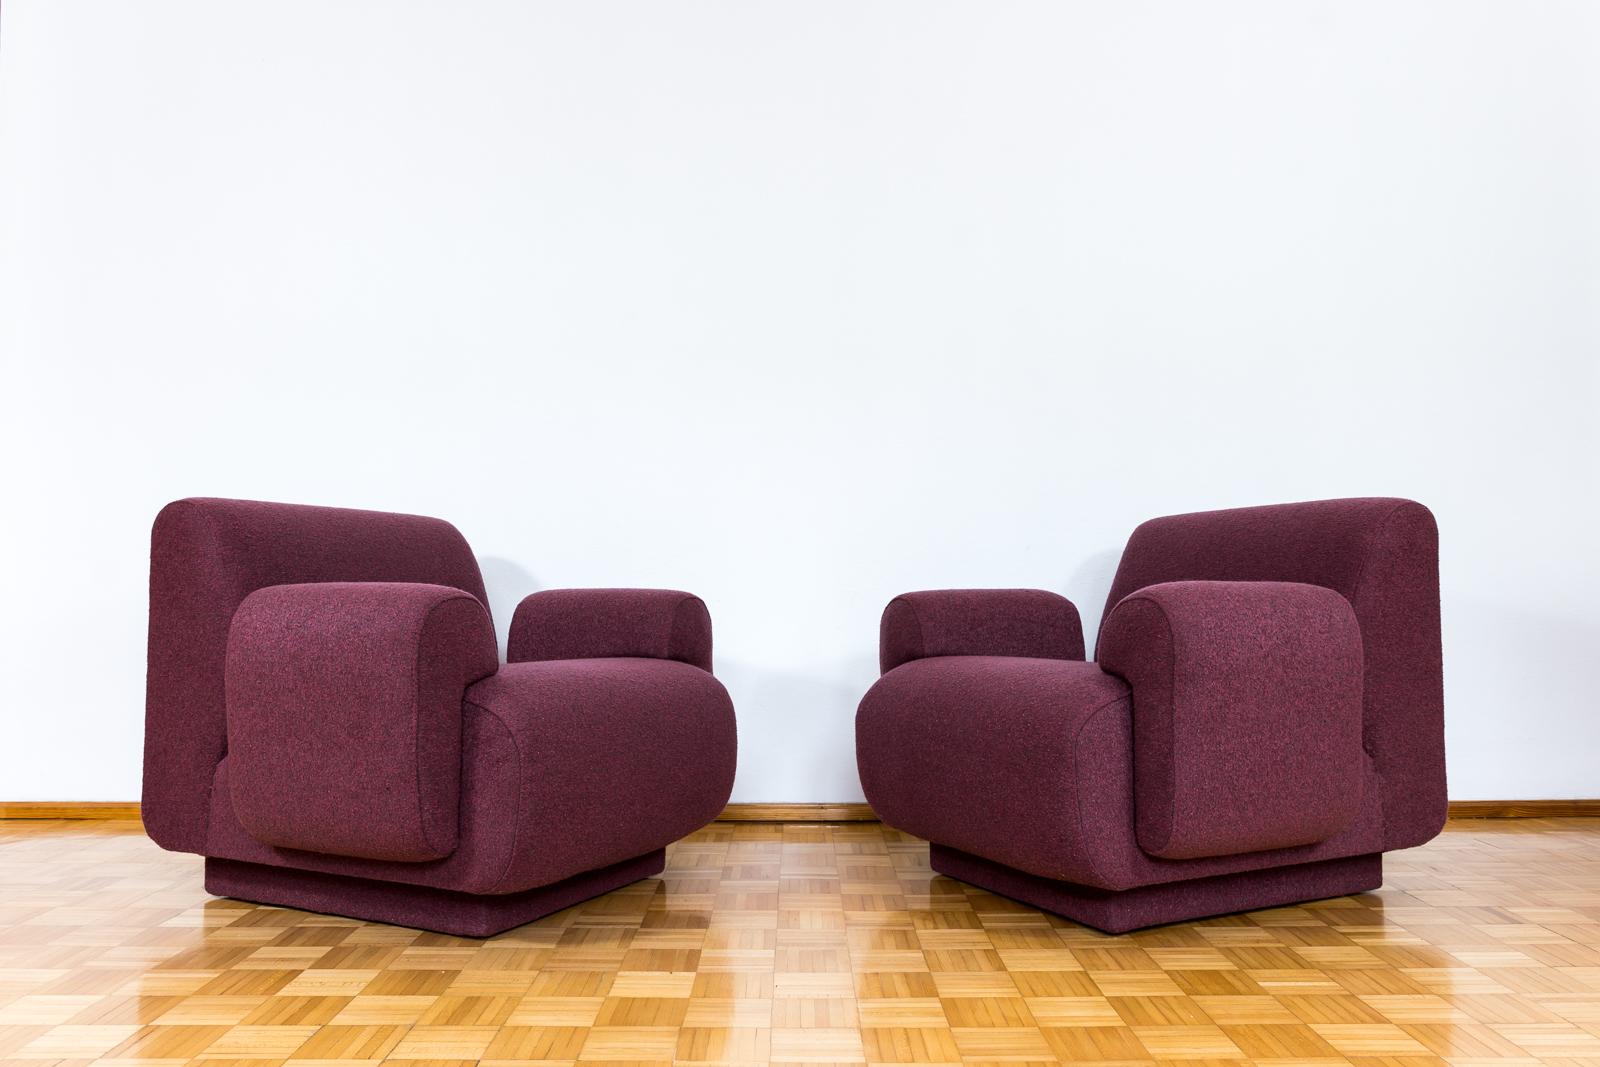 Pair of Modular Armchairs from Oelsa Furniture Factory in Rabenau, Germany, 1978.
Fully upholstered in dark-purple soft fabric.
This armchairs are modular and can be transform in to two-seater sofa (all armrests are removable)
Sofa dimension: H70,